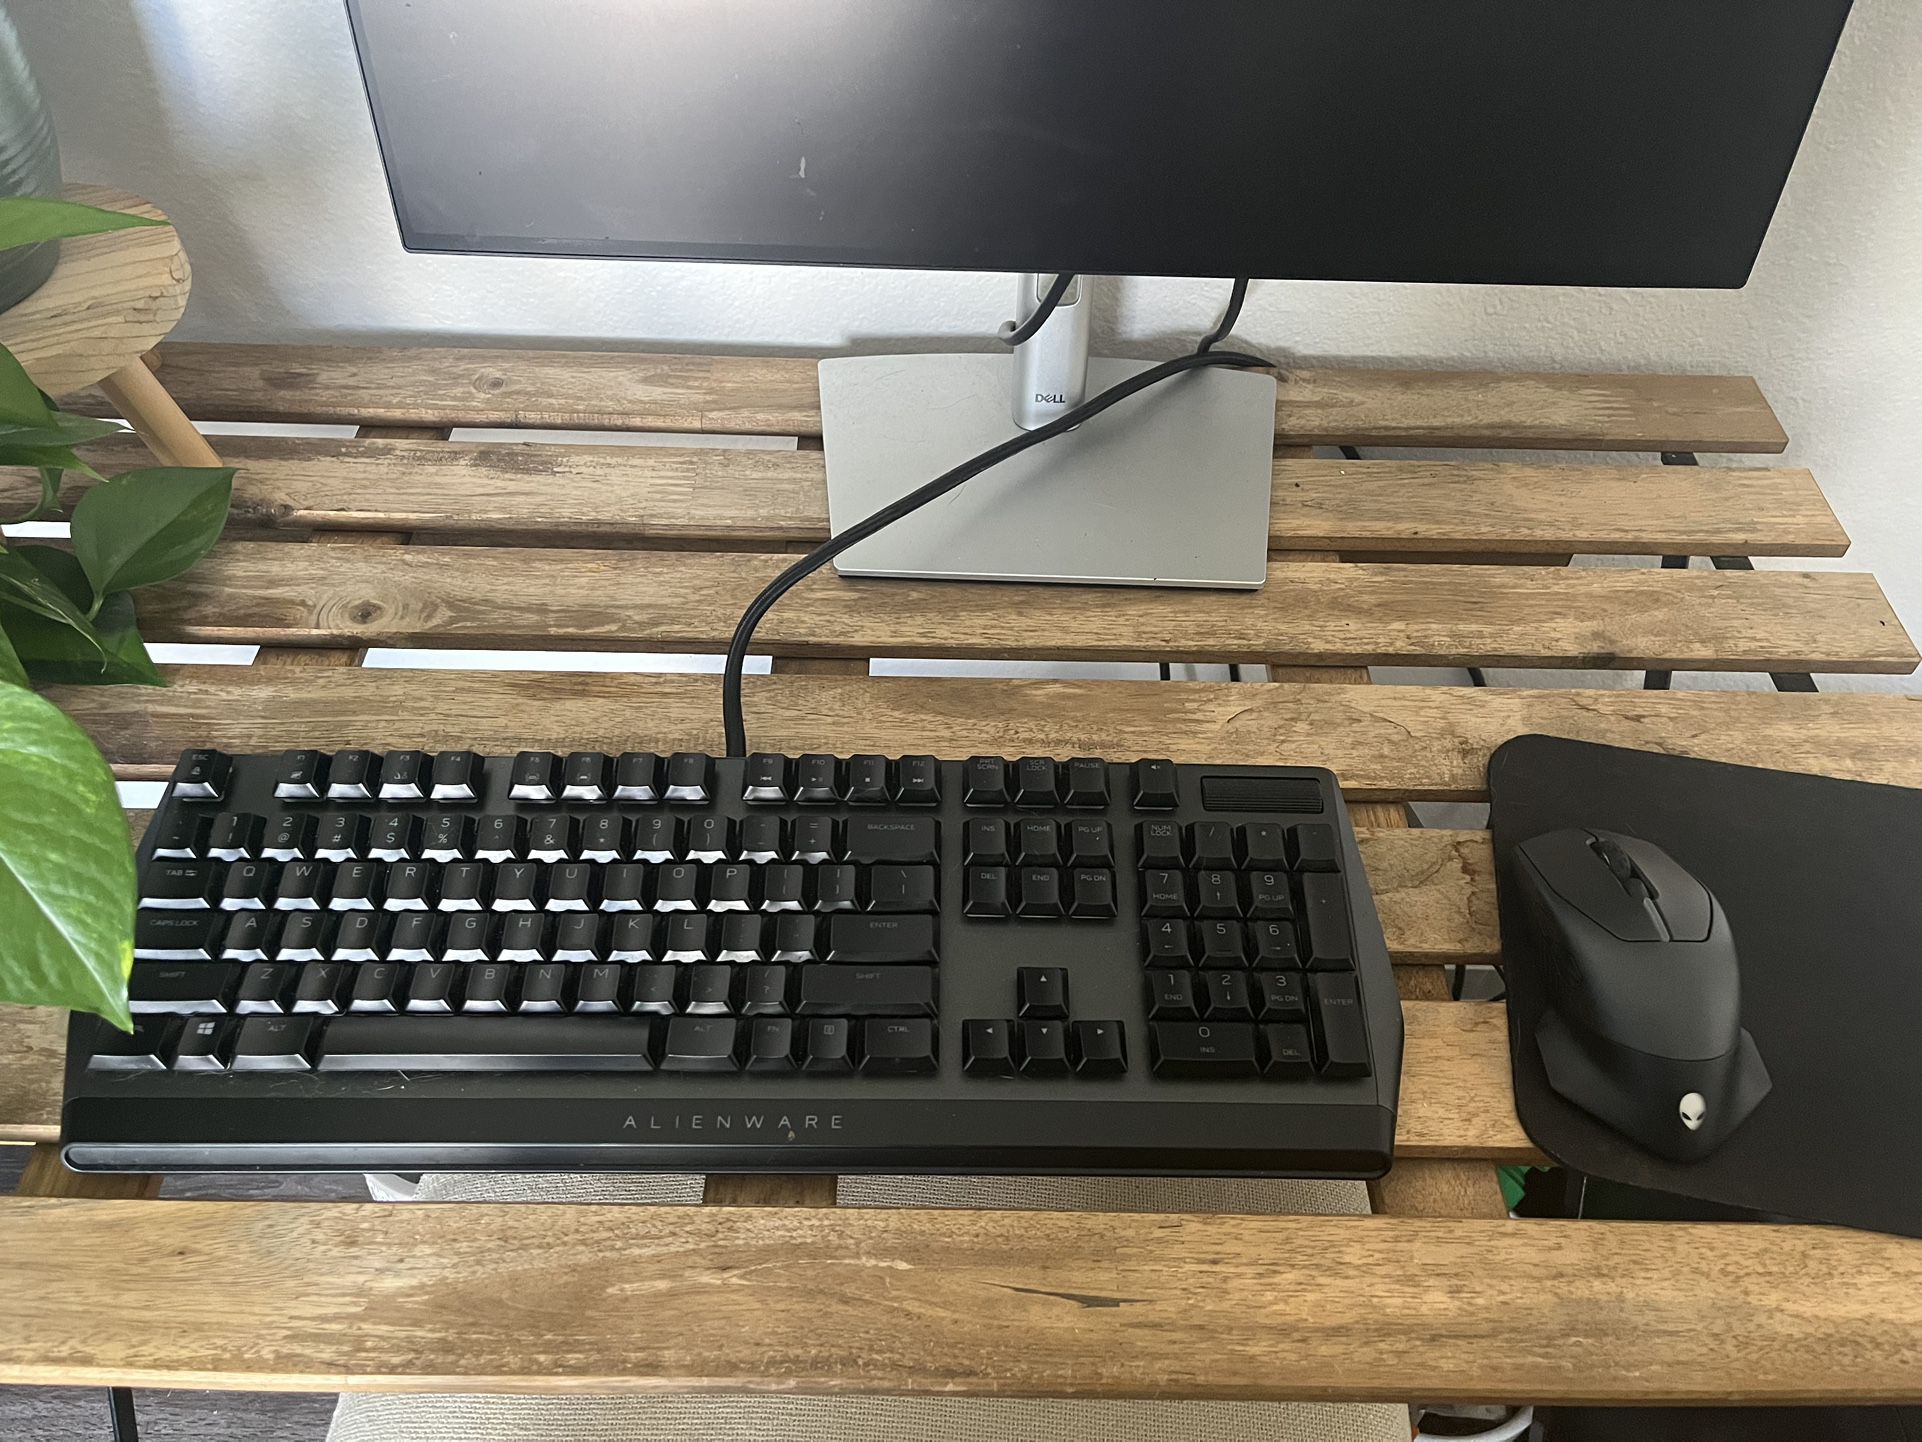 Alienware Keyboard And Wireless Mouse 